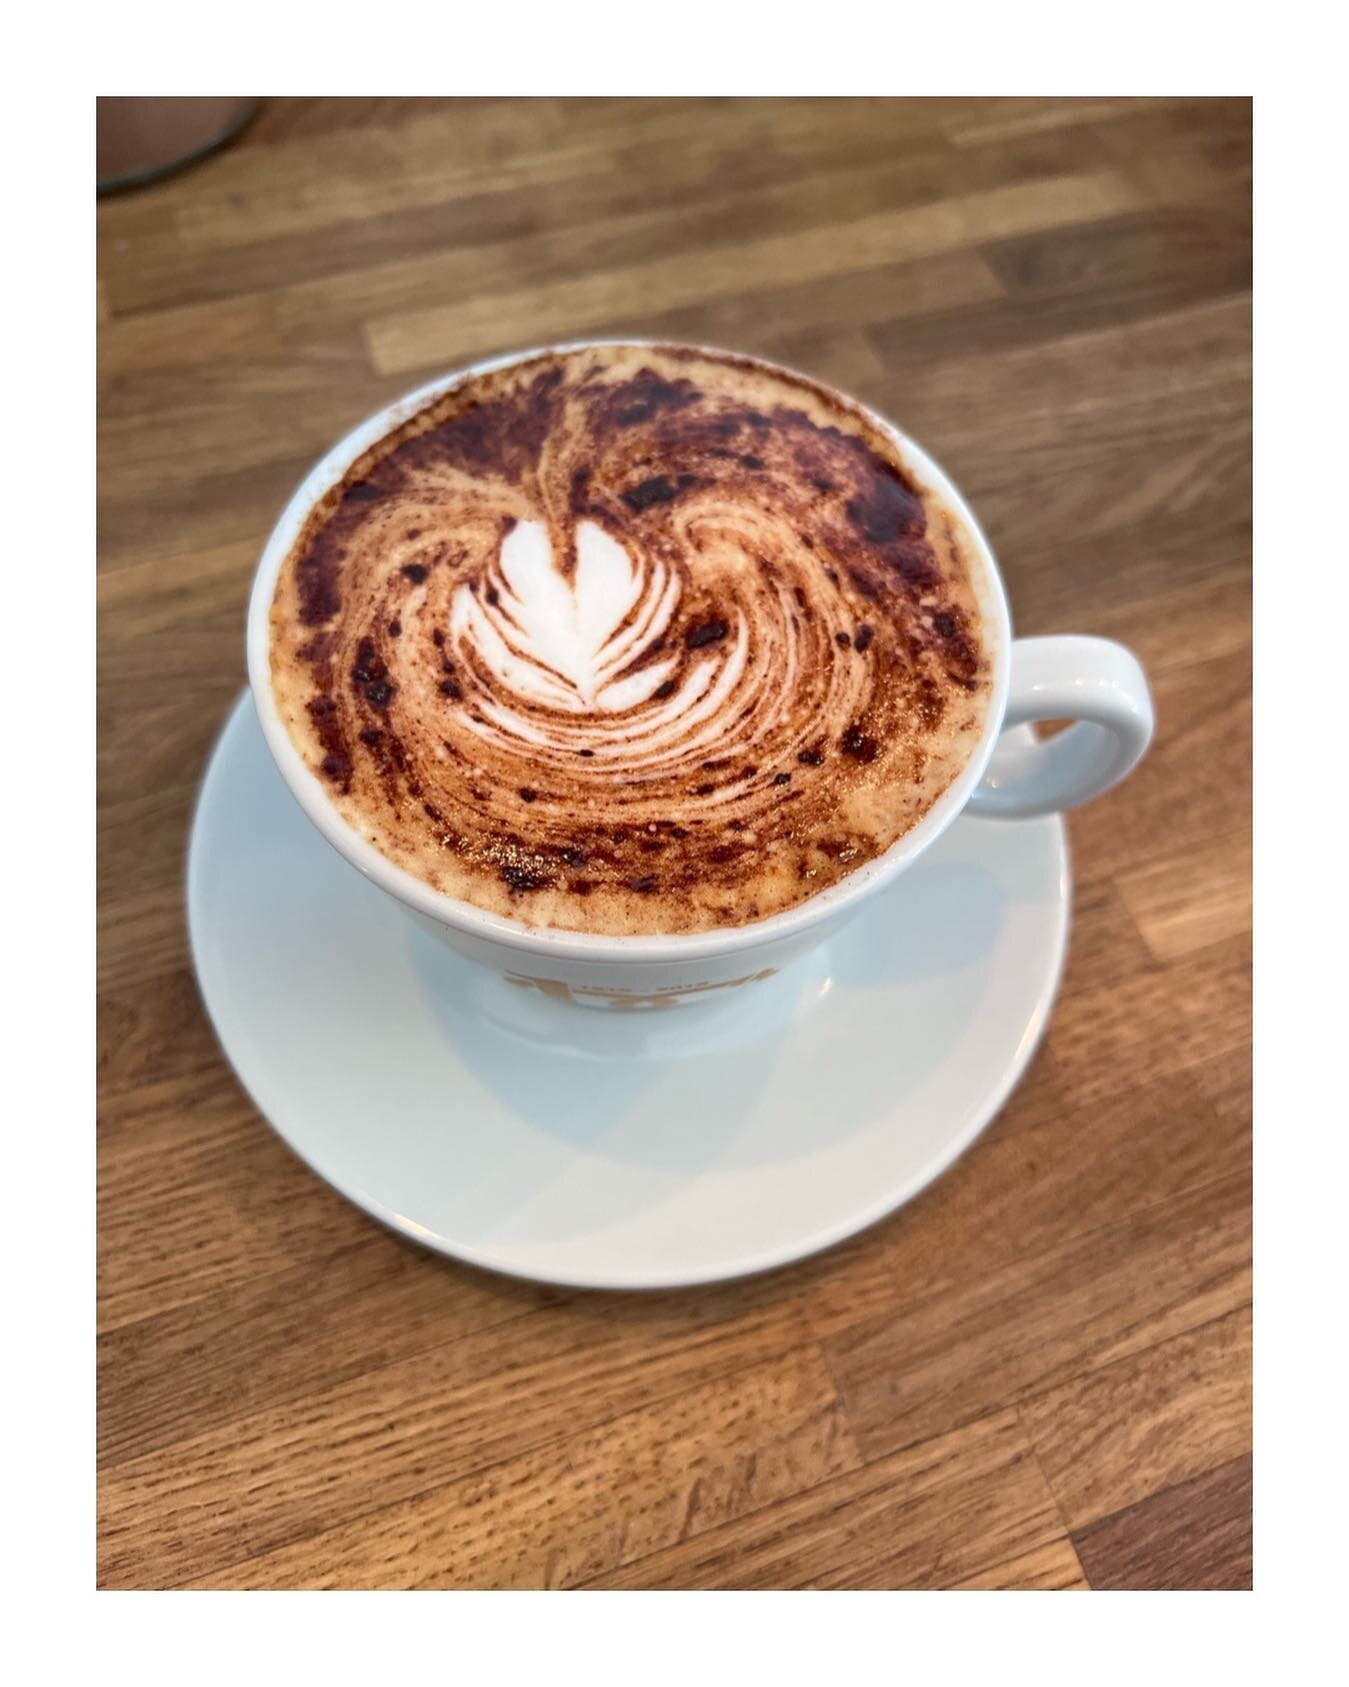 Time for coffee ☕️

#coffee #coffeetime #caffieneaddict #wakeup #dykeroadparkcafe #barrista #hove #brighton #brightonandhove #lovecoffee #wakeuphappy #sun #summer #spring #easter